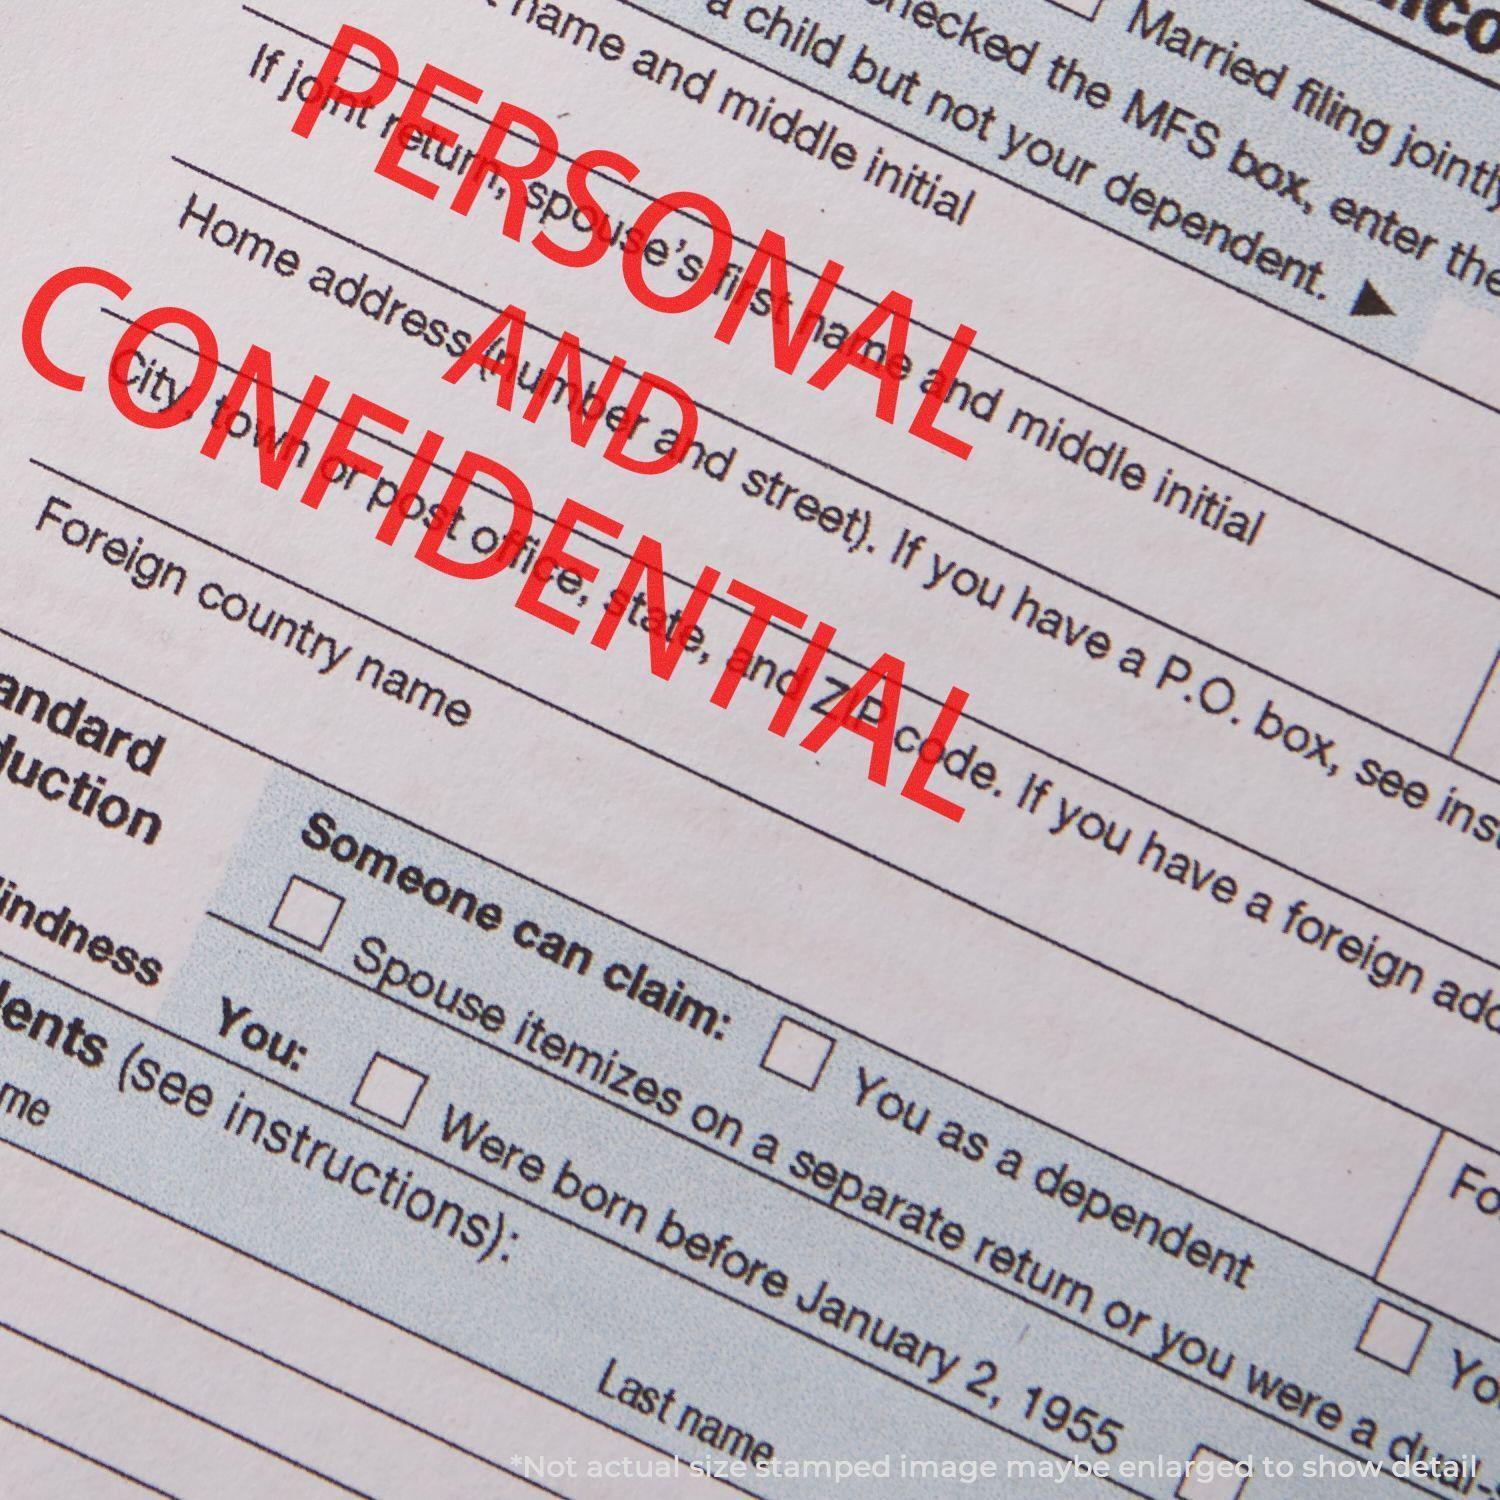 A stock office rubber stamp with a stamped image showing how the text "PERSONAL AND CONFIDENTIAL" in a large font is displayed after stamping.